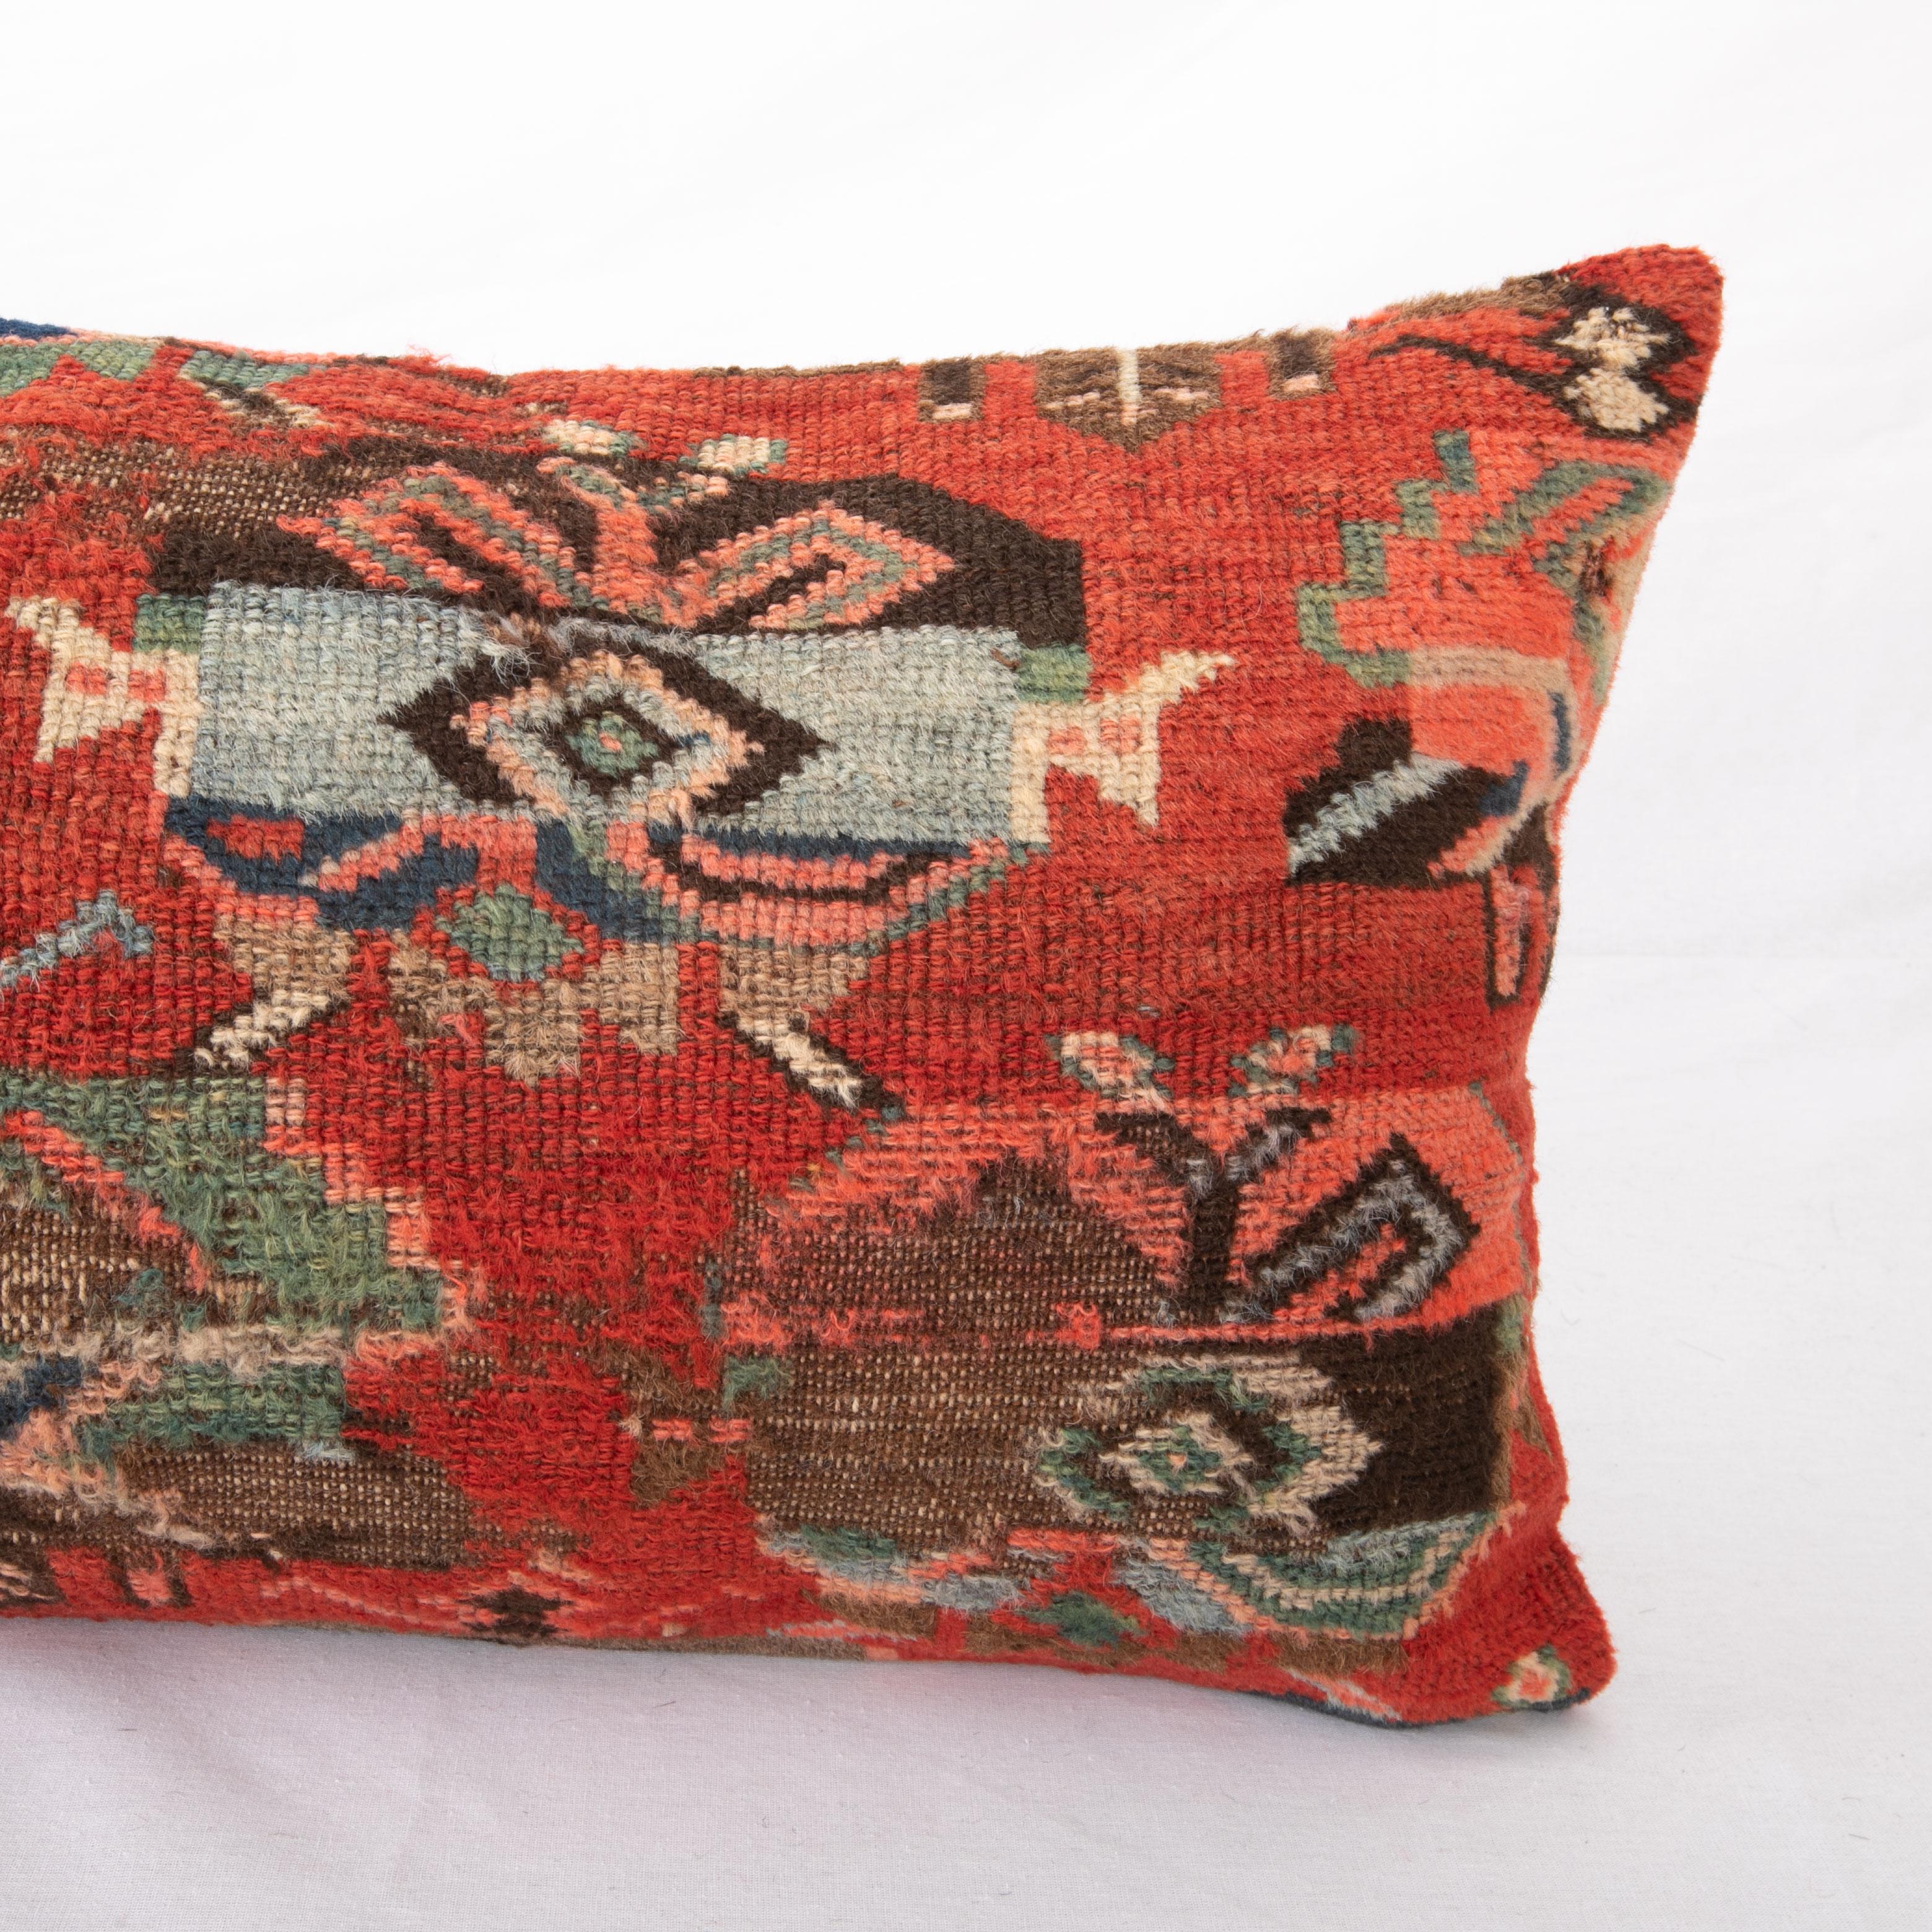 Hand-Woven Rug Pillow Cover Made from a Caucasian Karabagh Rug, late 19th / Early 20th C. For Sale